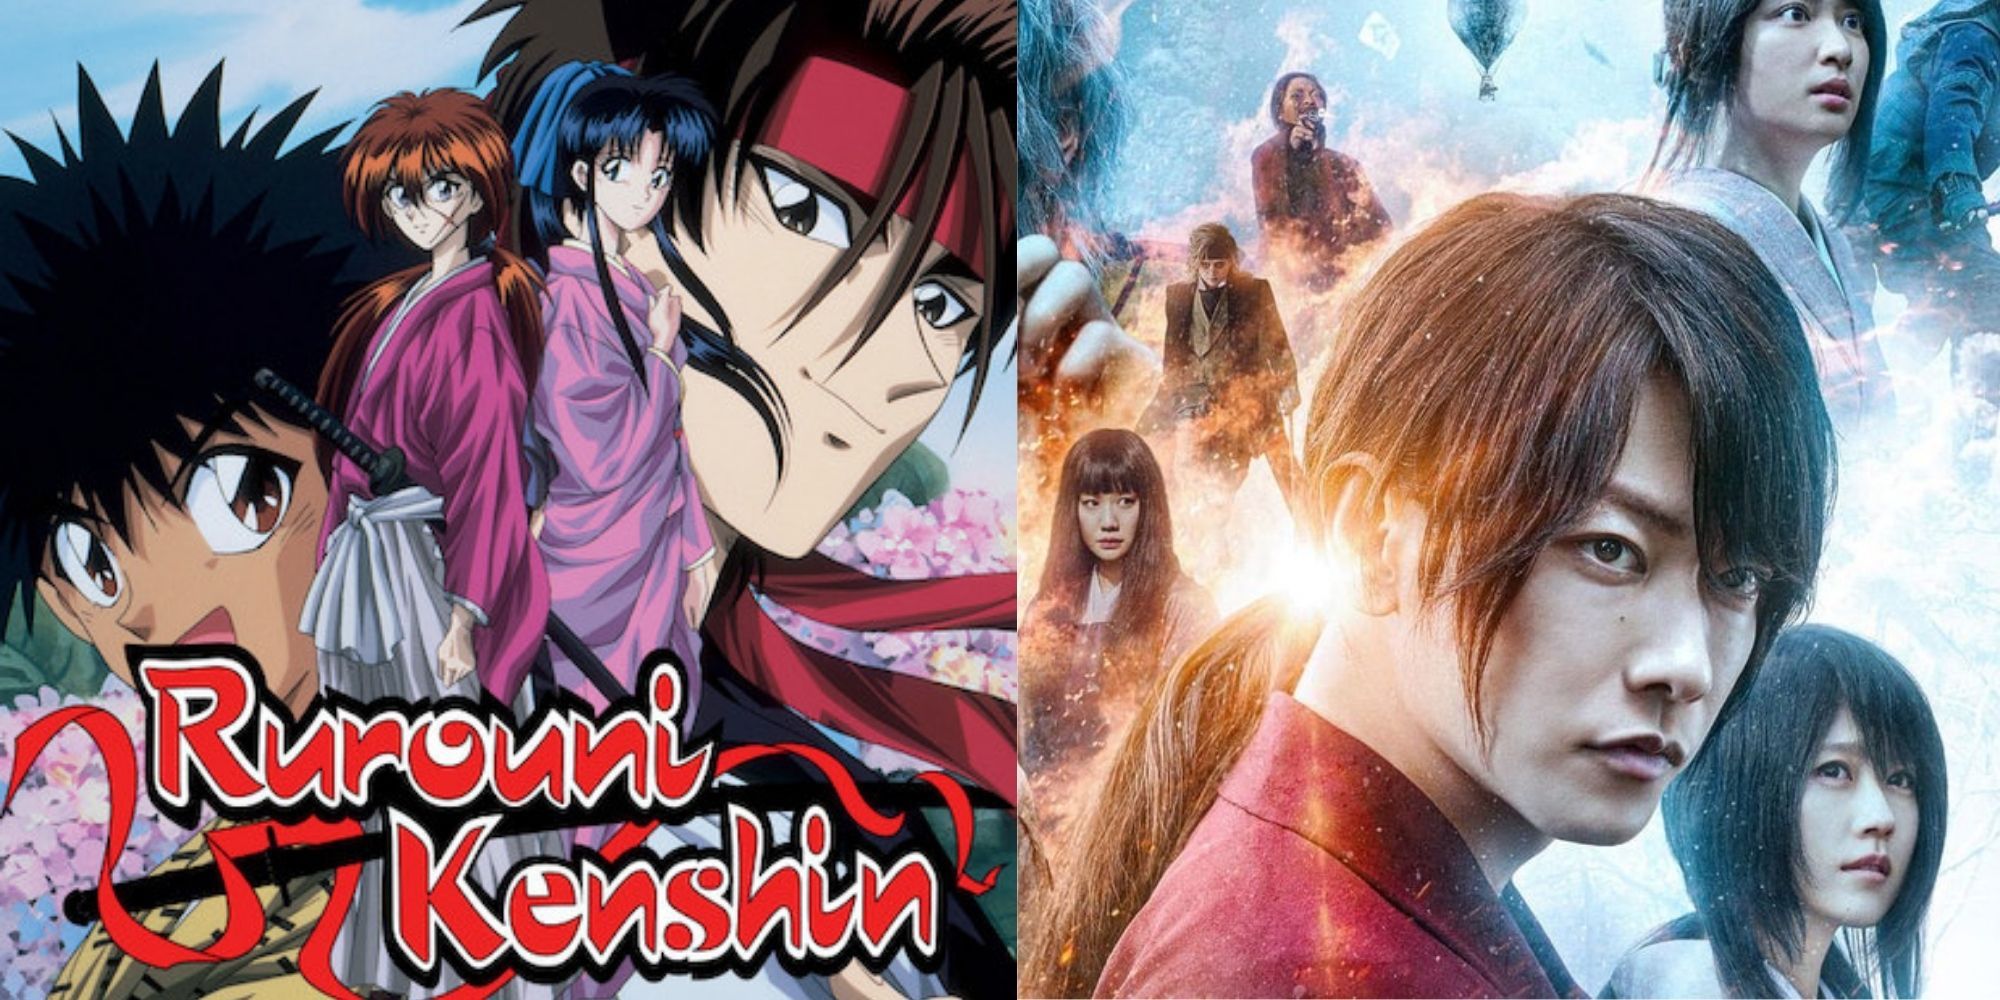 Rurouni Kenshin anime and live-action poster